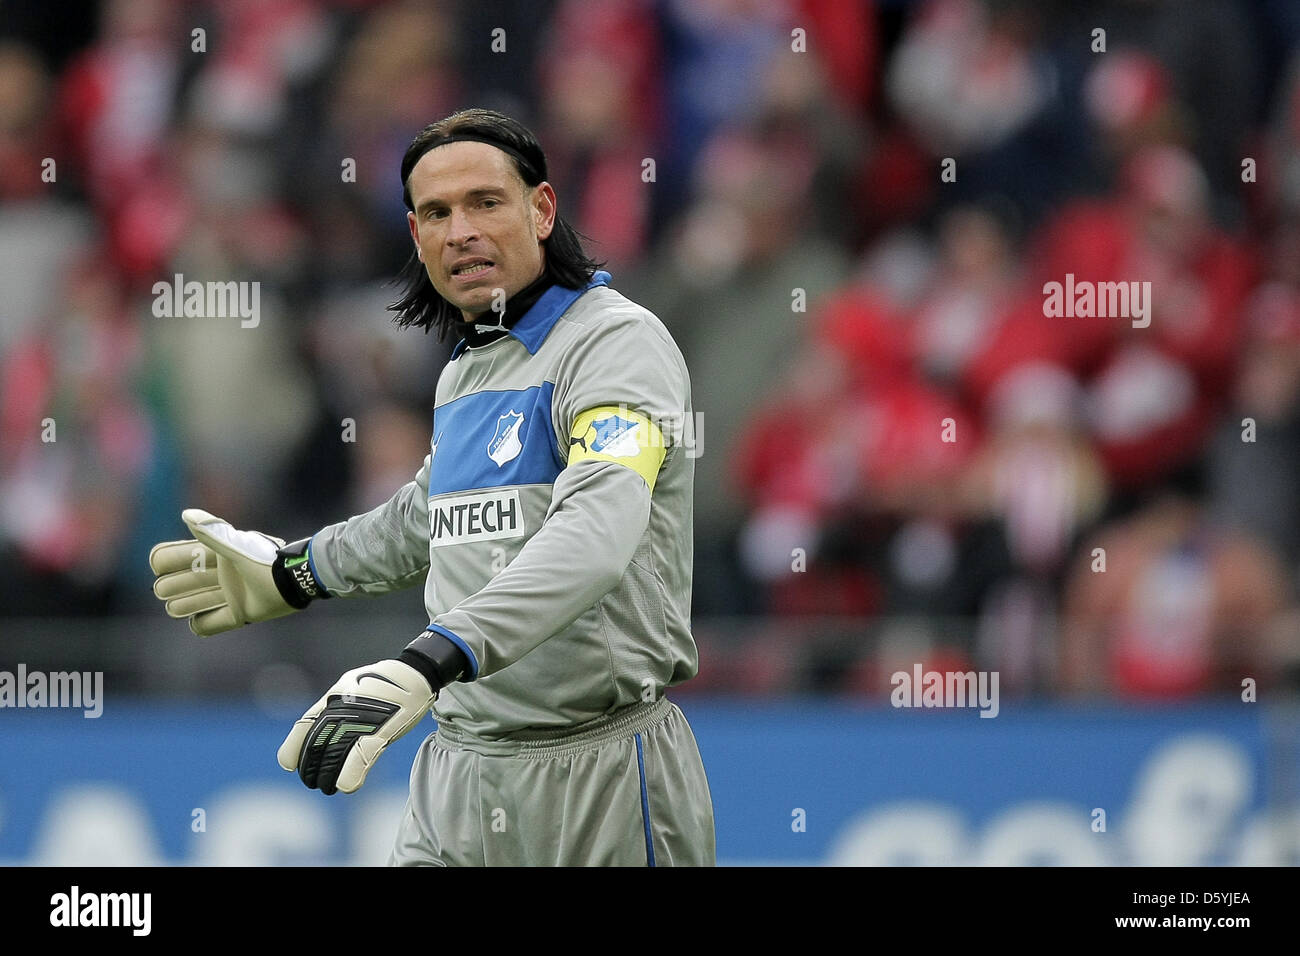 Hoffenheim's keeper Tim Wiese is annoyed after the third Mainz during a German Bundesliga match between 1 FSV Mainz 05 and 1899 Hoffenheim at the Coface Arena in Mainz, Germany,